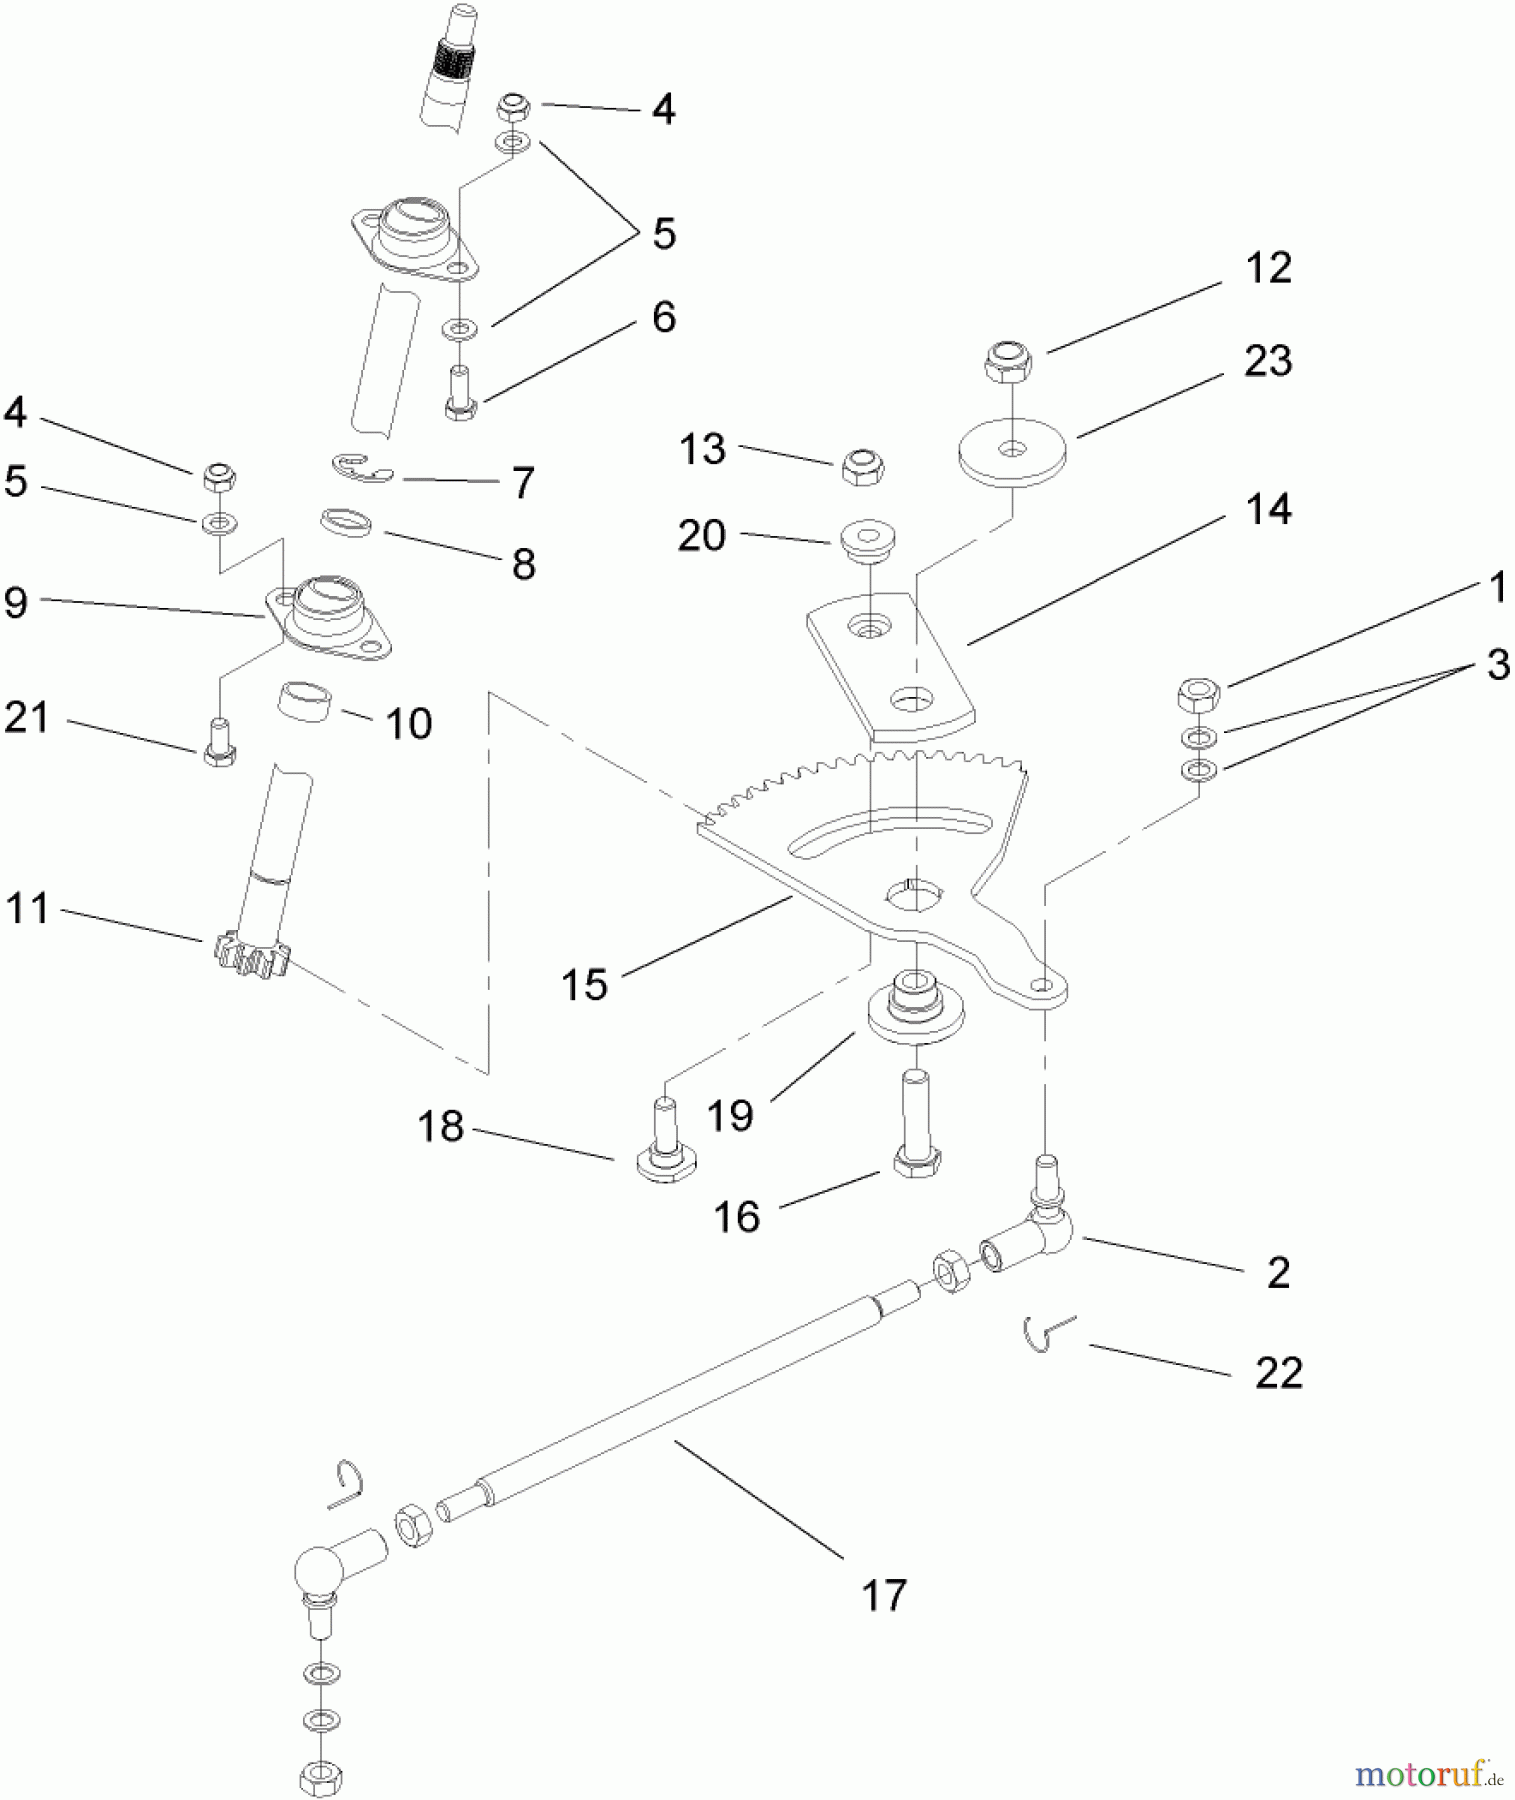  Toro Neu Mowers, Lawn & Garden Tractor Seite 1 74570 (DH 210) - Toro DH 210 Lawn Tractor, 2006 (260000001-260999999) STEERING ASSEMBLY